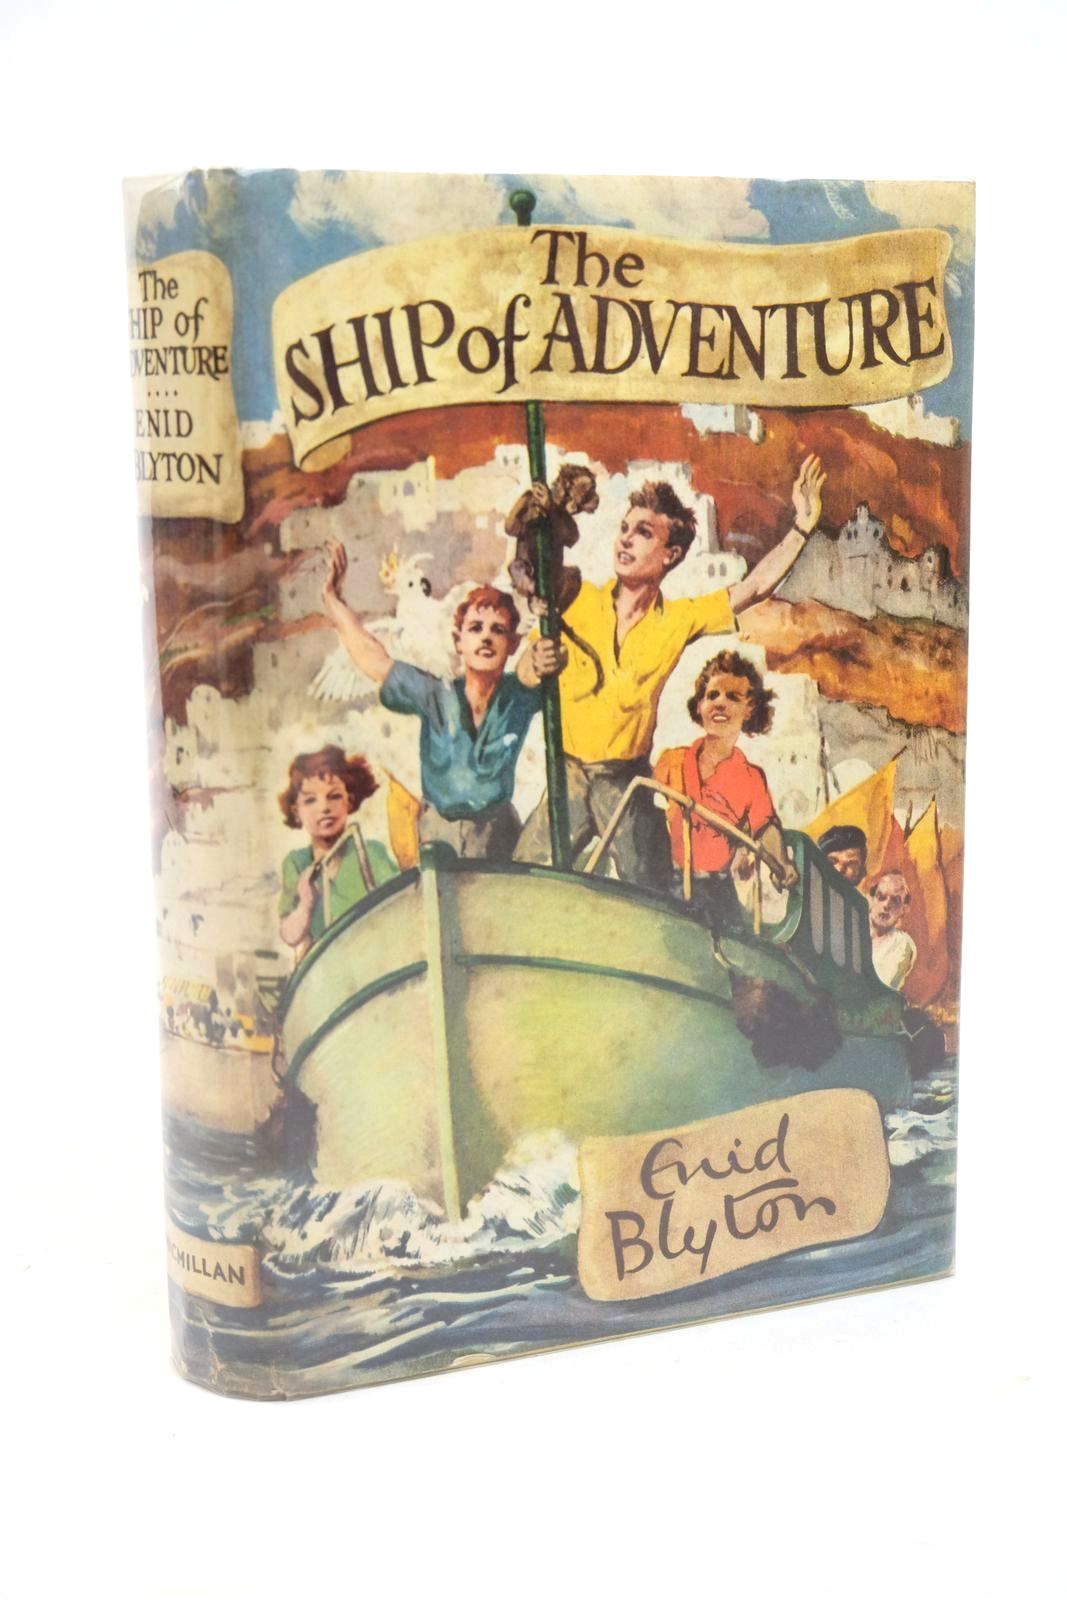 Photo of THE SHIP OF ADVENTURE written by Blyton, Enid illustrated by Tresilian, Stuart published by Macmillan & Co. Ltd. (STOCK CODE: 1323158)  for sale by Stella & Rose's Books